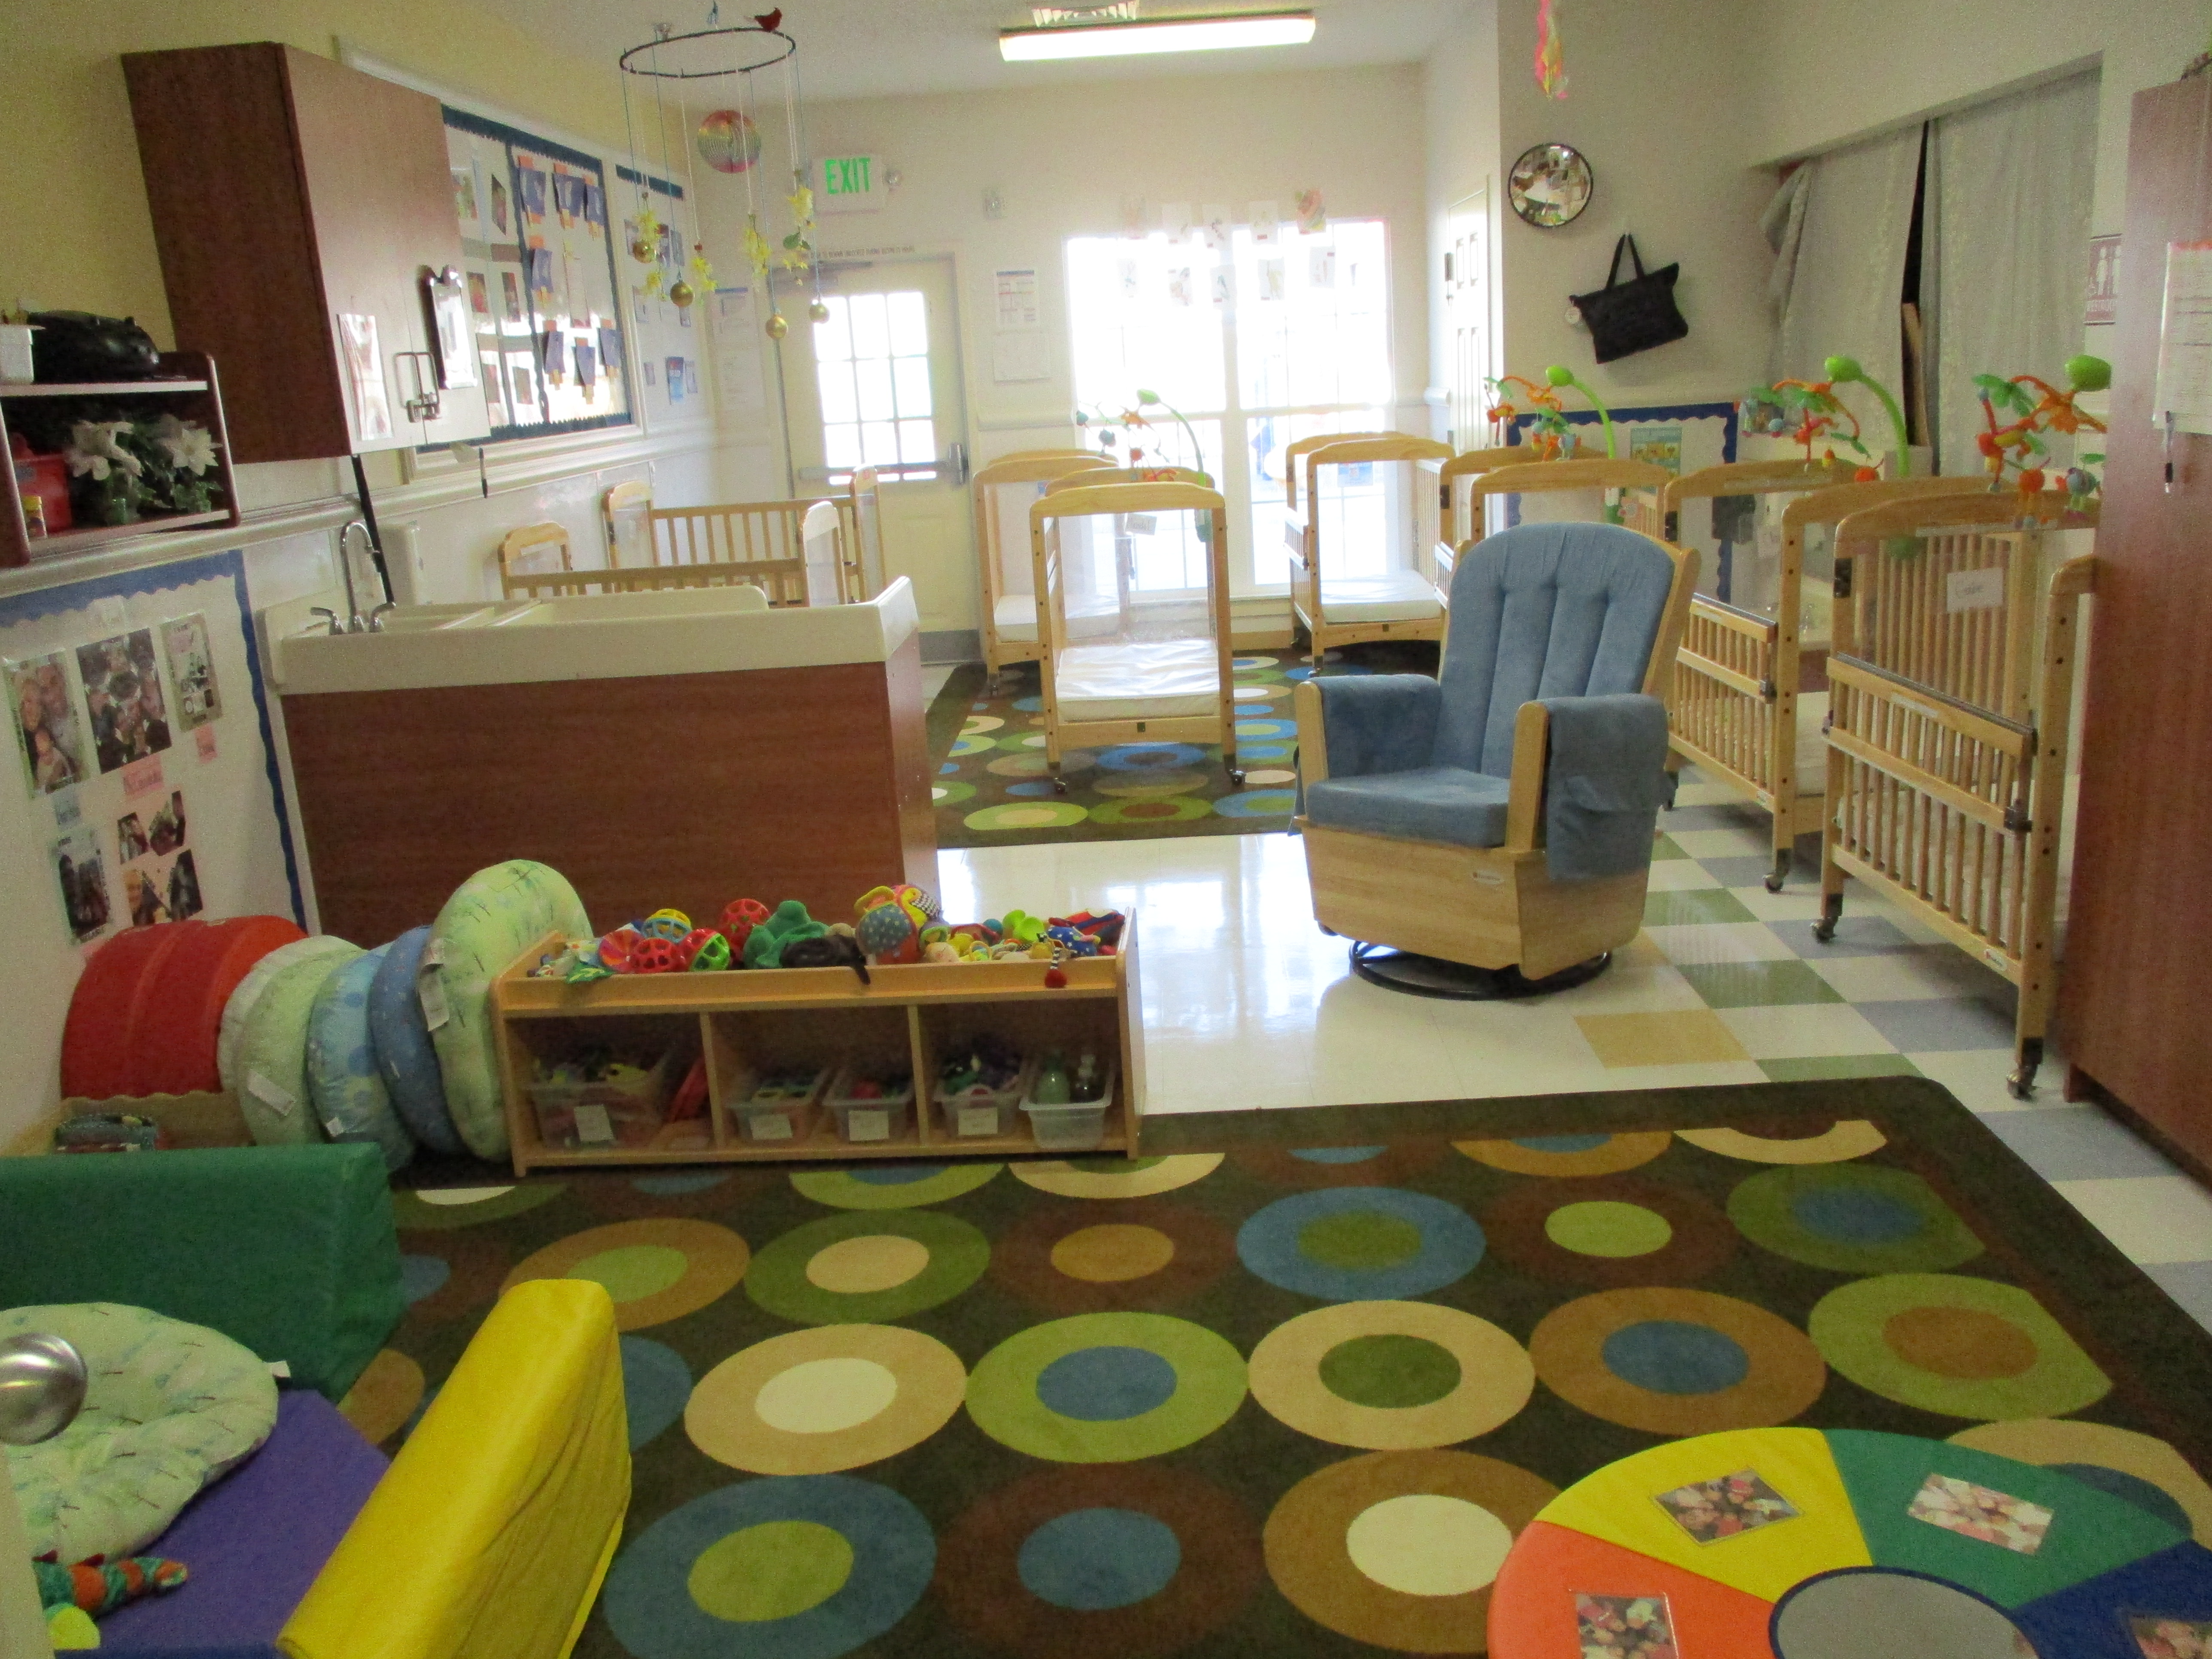 Our younger infant is a warm and welcoming place.